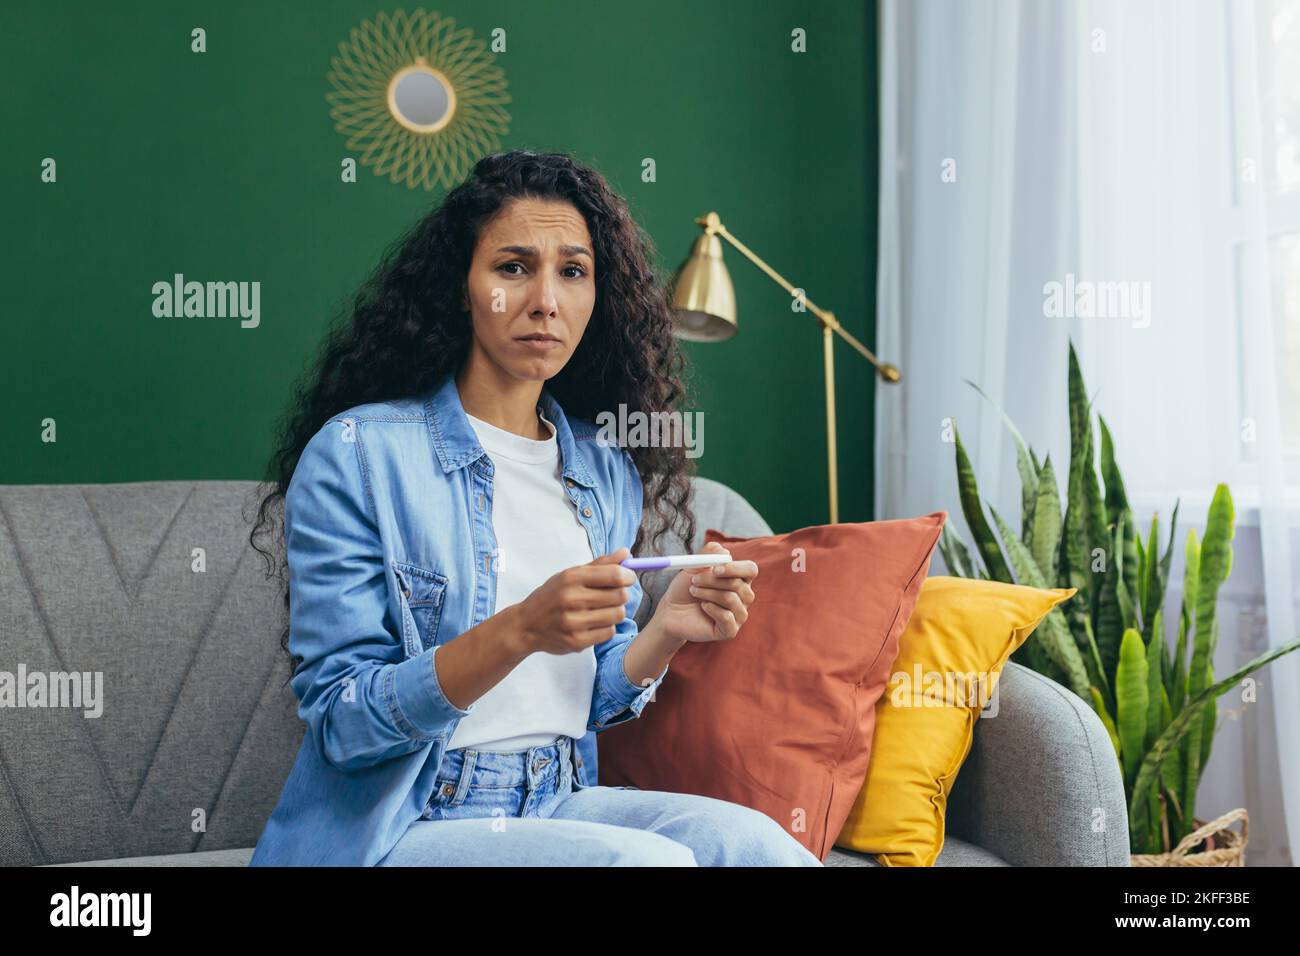 A beautiful young Latin American woman is shocked by the news of an unplanned pregnancy. She is sitting at home on the couch, holding a positive home pregnancy test in her hands. Confused, she looks at the camera. Stock Photo